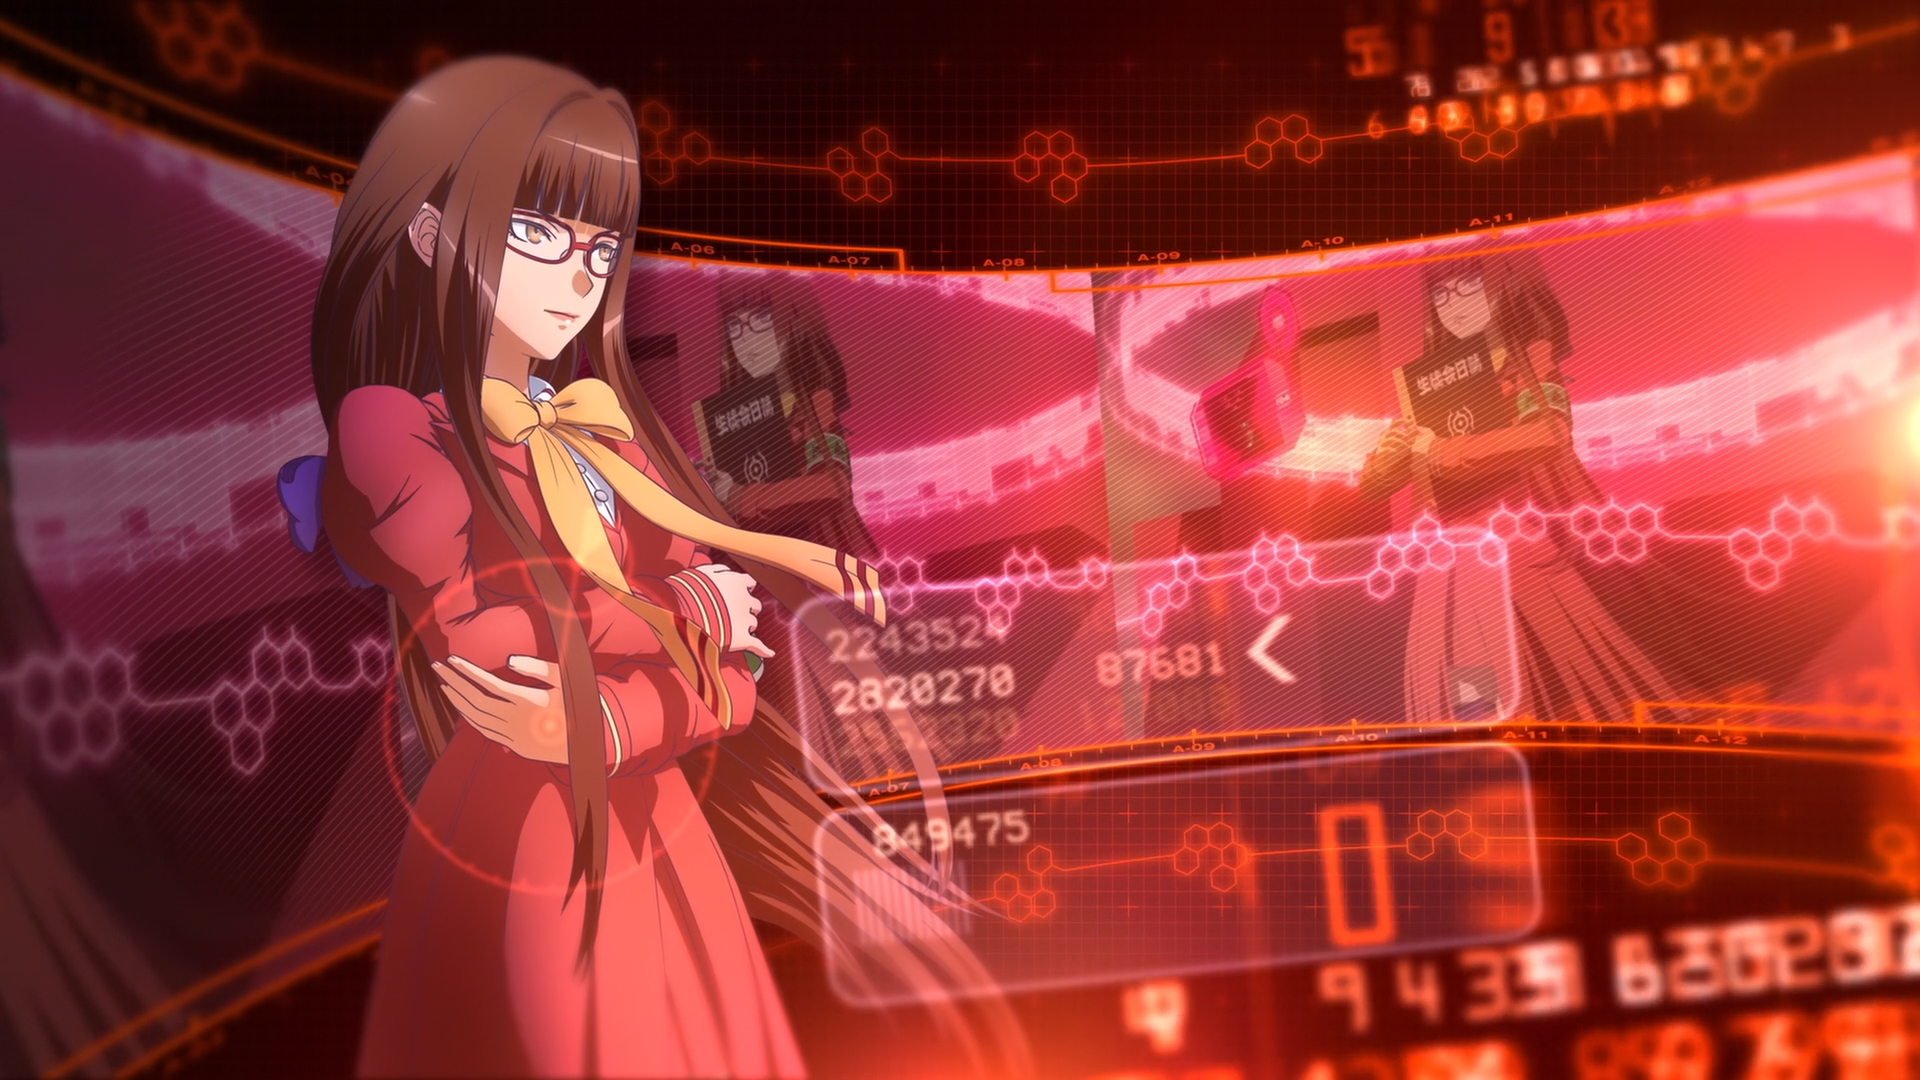 Anime 1920x1080 Aoki Hagane no Arpeggio anime girls numbers anime women with glasses brunette red clothing